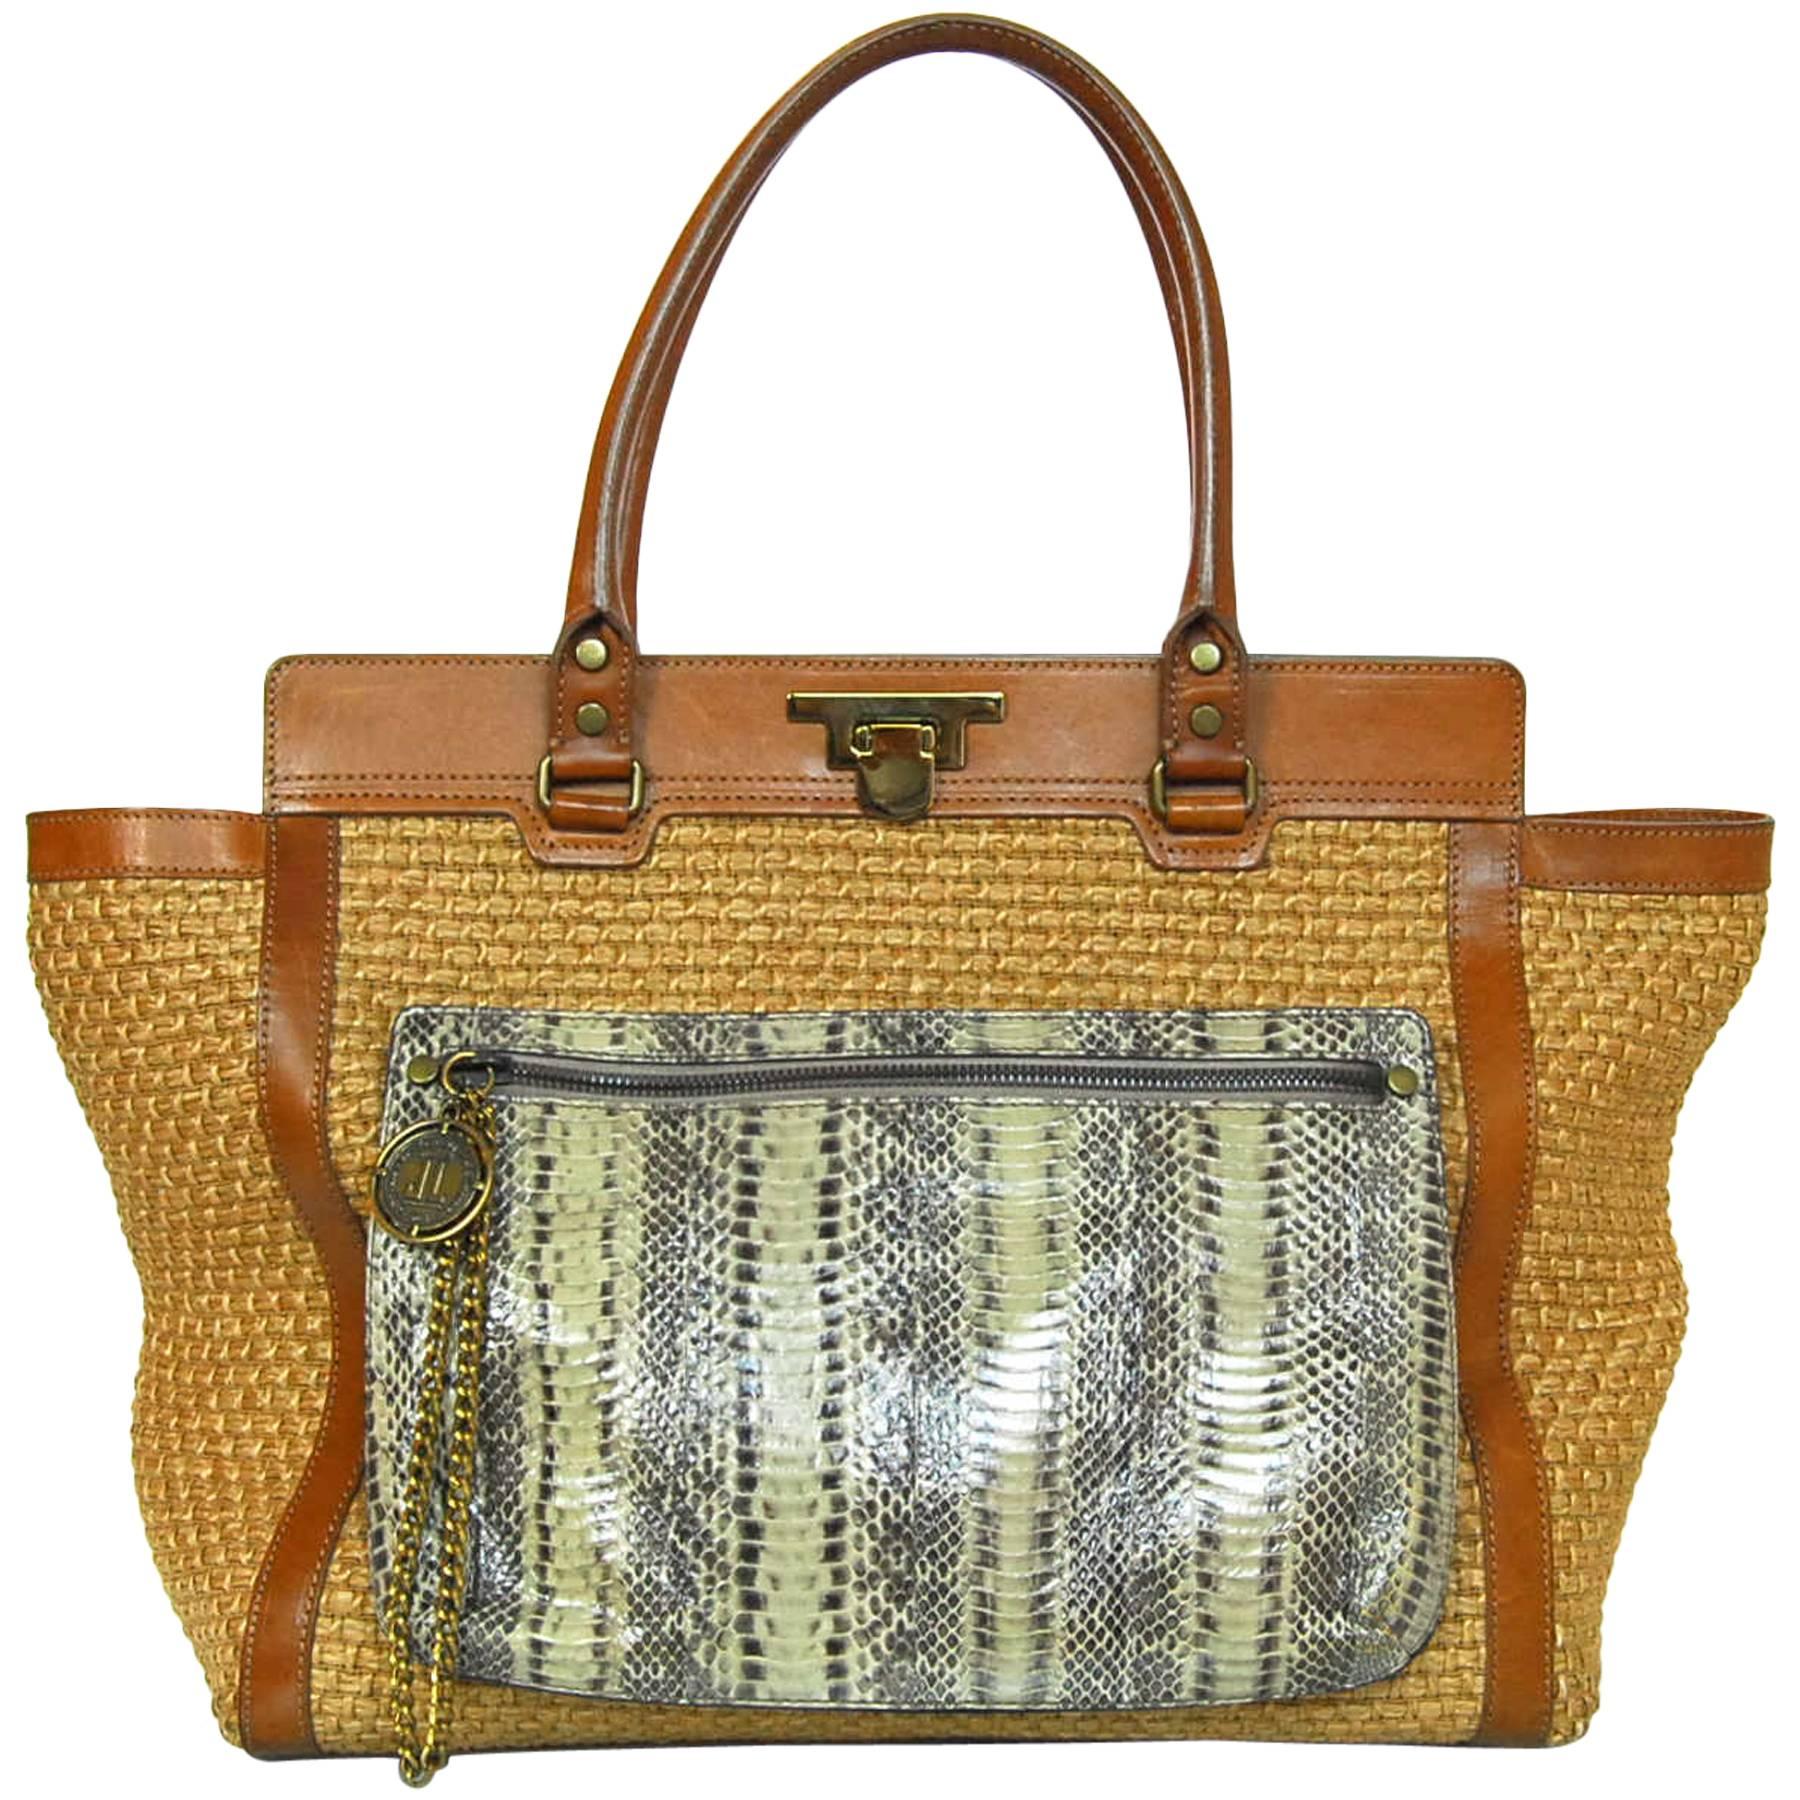 Lanvin Tan Woven Tote Bag with Detachable Snakeskin Pouch 